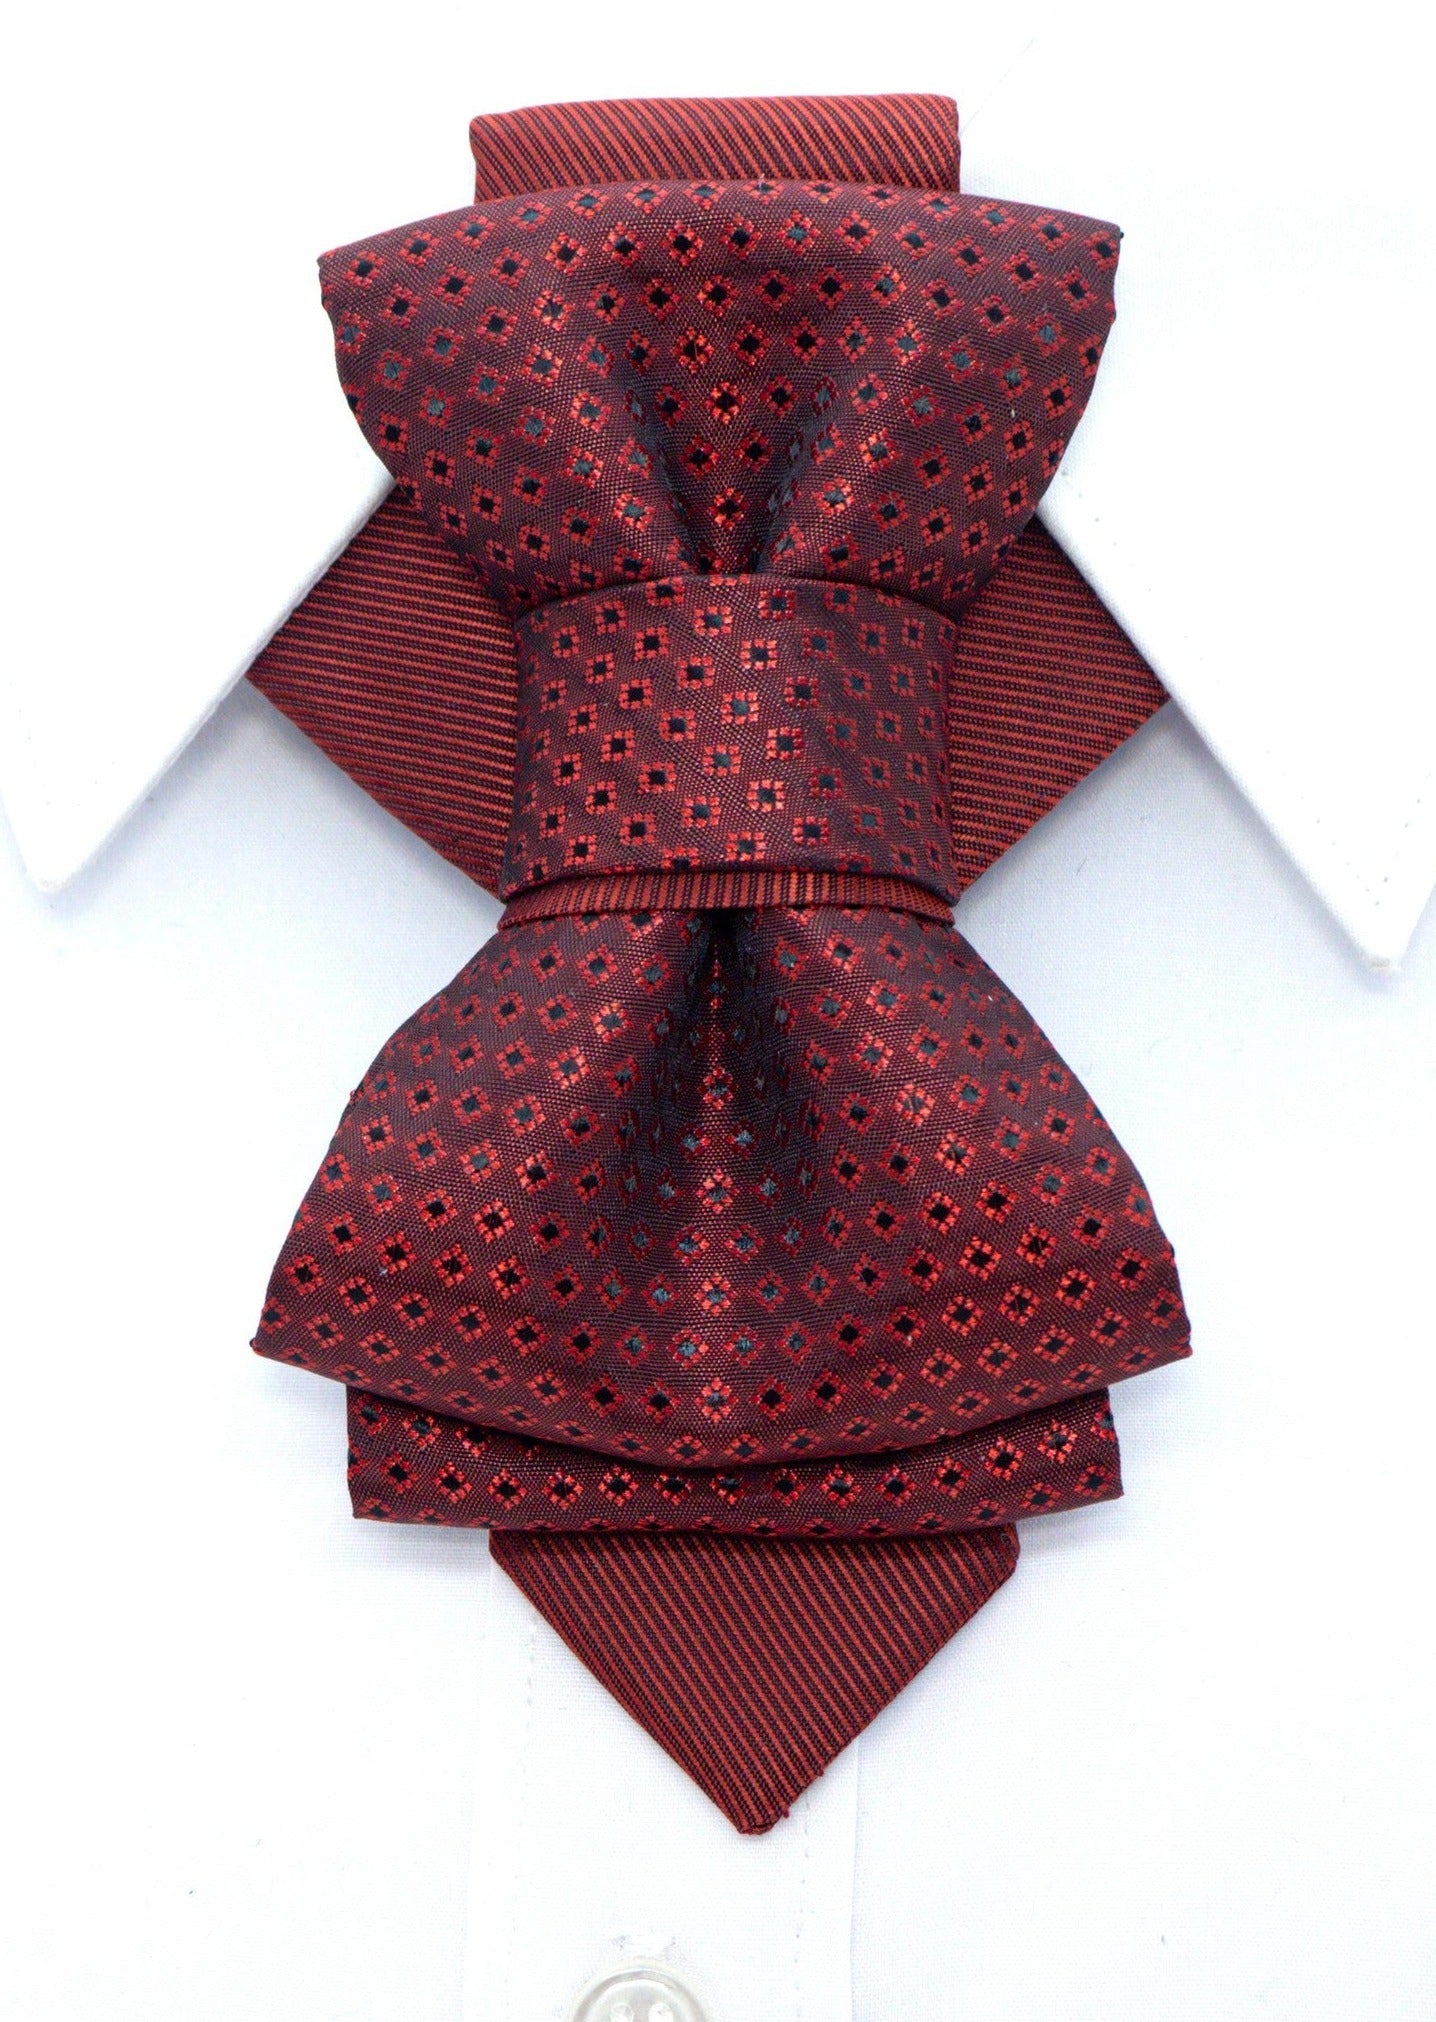 Red wedding bow tie, Red necktie for groom, bow tie for men